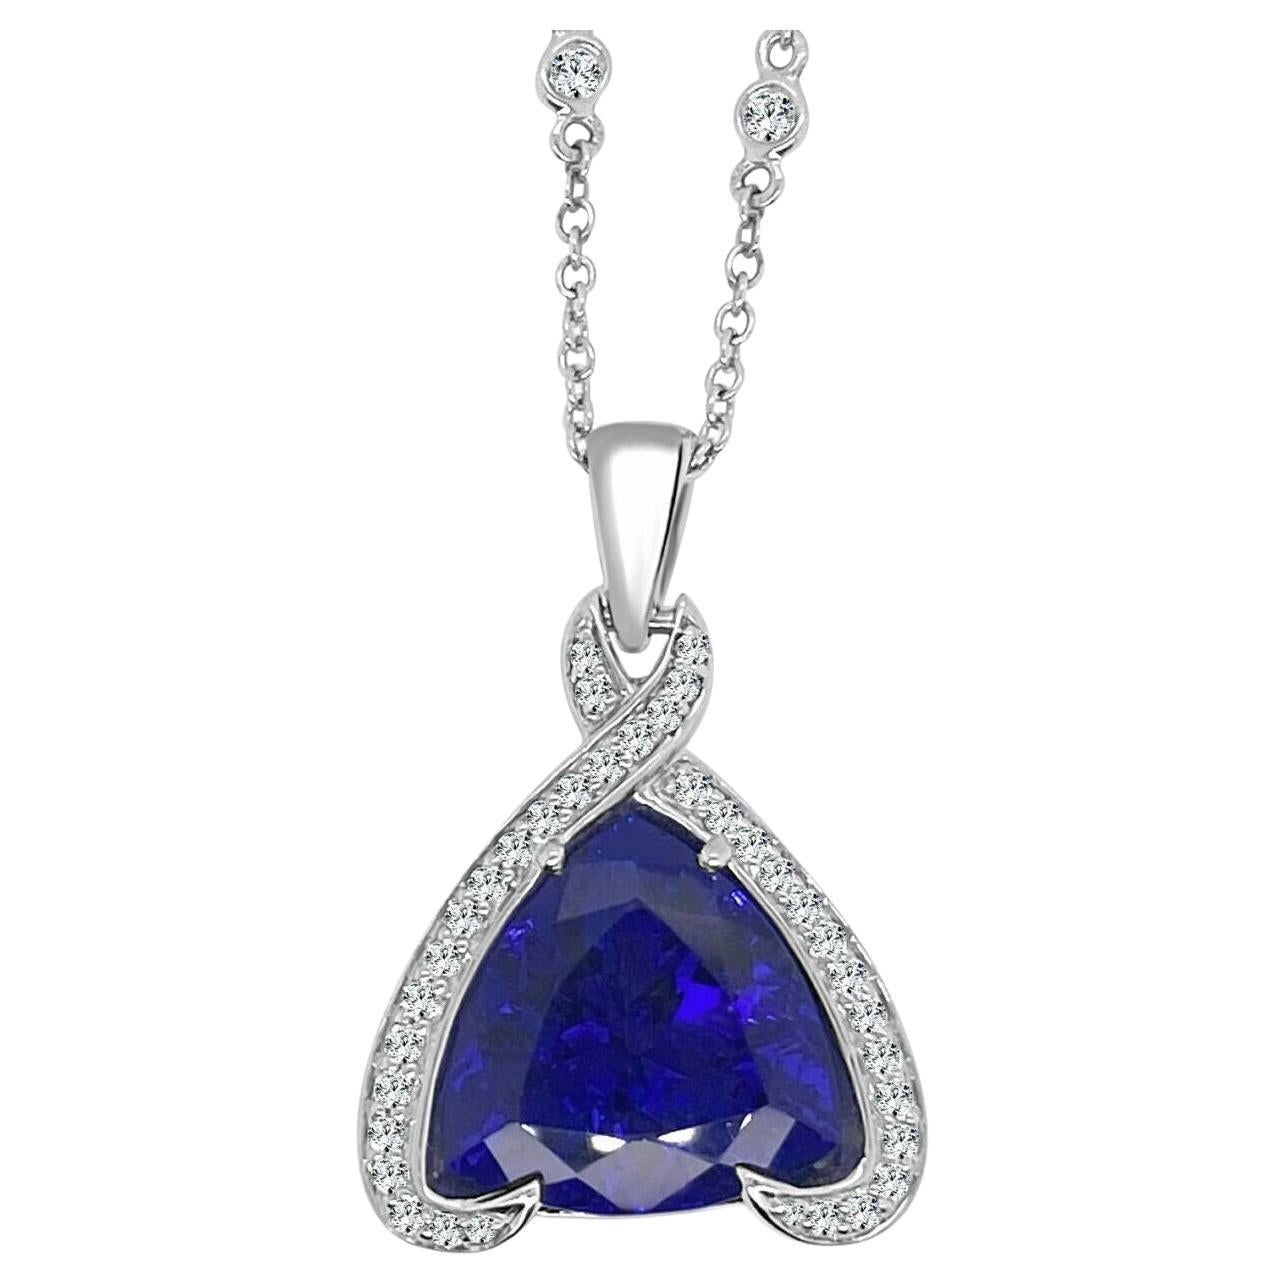 Frederic Sage Pendant Necklace in Trillion Gem Tanzanite on White Gold For Sale